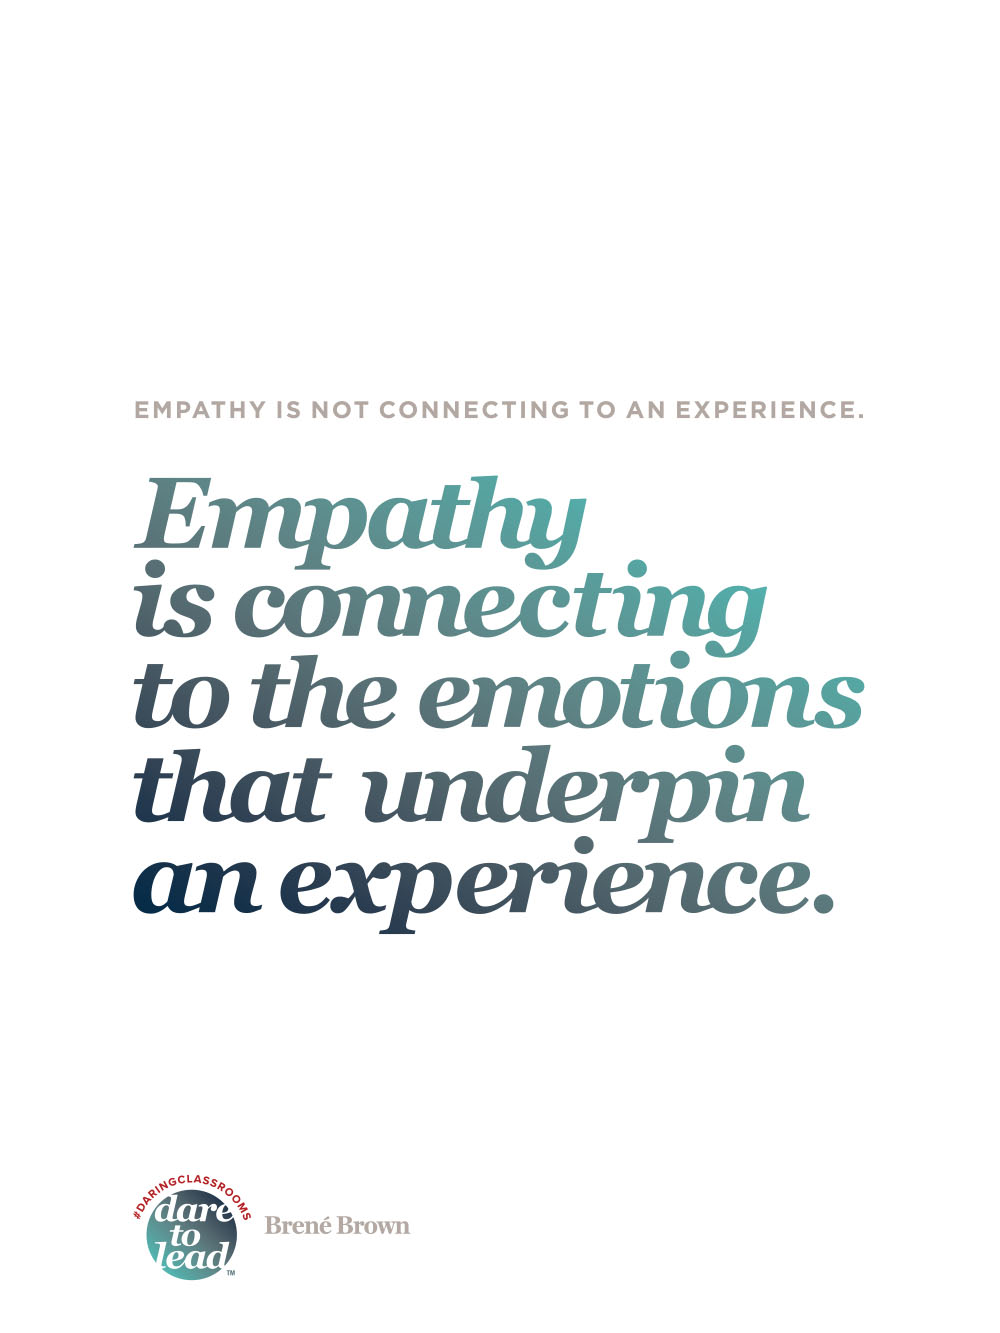 Empathy is not connecting to an experience. Empathy is connecting to the emotions that underpin an experience.